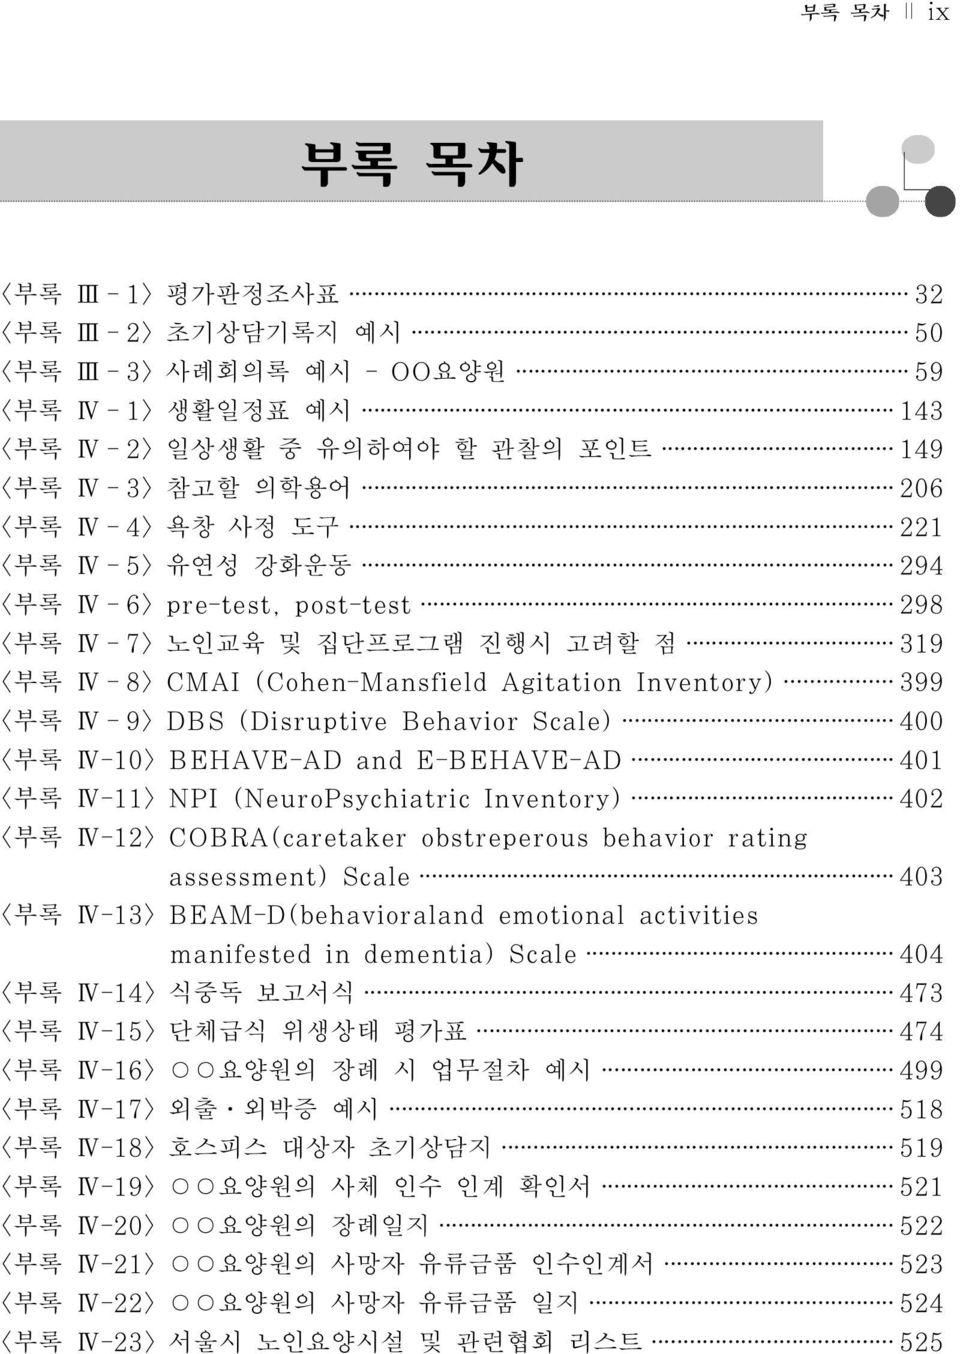 Scale) 400 <부록 Ⅳ-10> BEHAVE-AD and E-BEHAVE-AD 401 <부록 Ⅳ-11> NPI (NeuroPsychiatric Inventory) 402 <부록 Ⅳ-12> COBRA(caretaker obstreperous behavior rating assessment) Scale 403 <부록 Ⅳ-13>